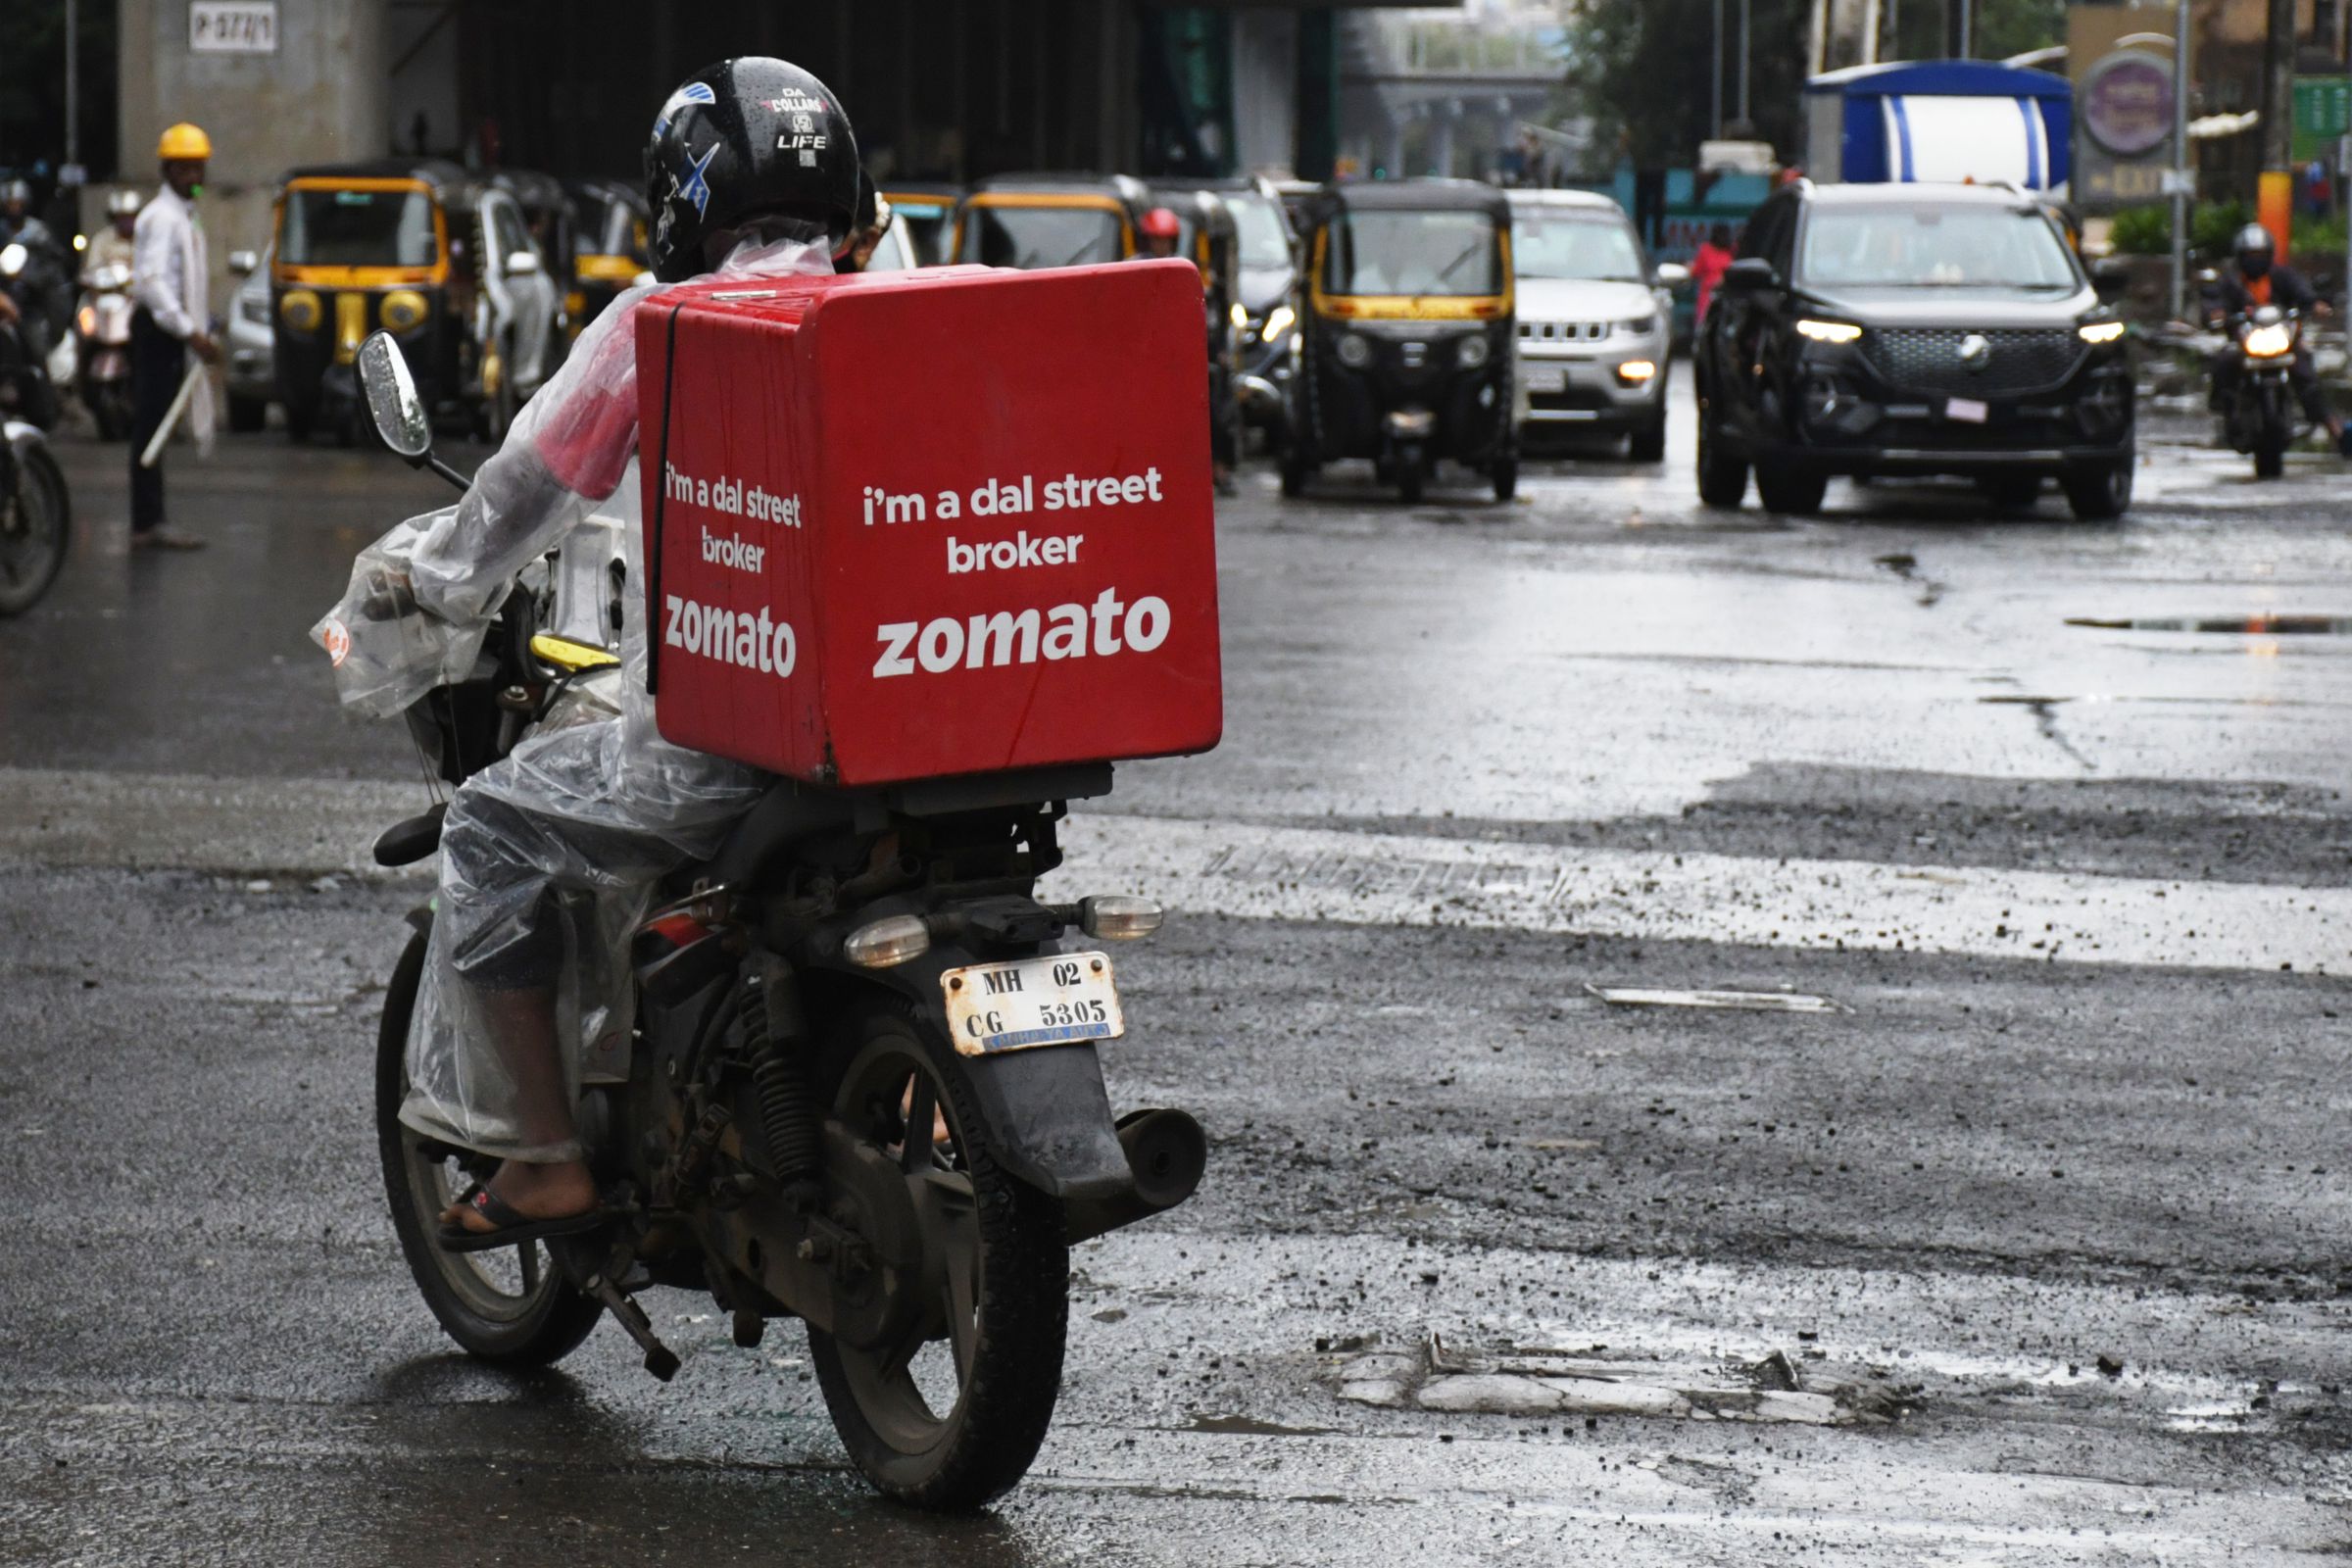 A Zomato delivery man seen riding along the streets of...